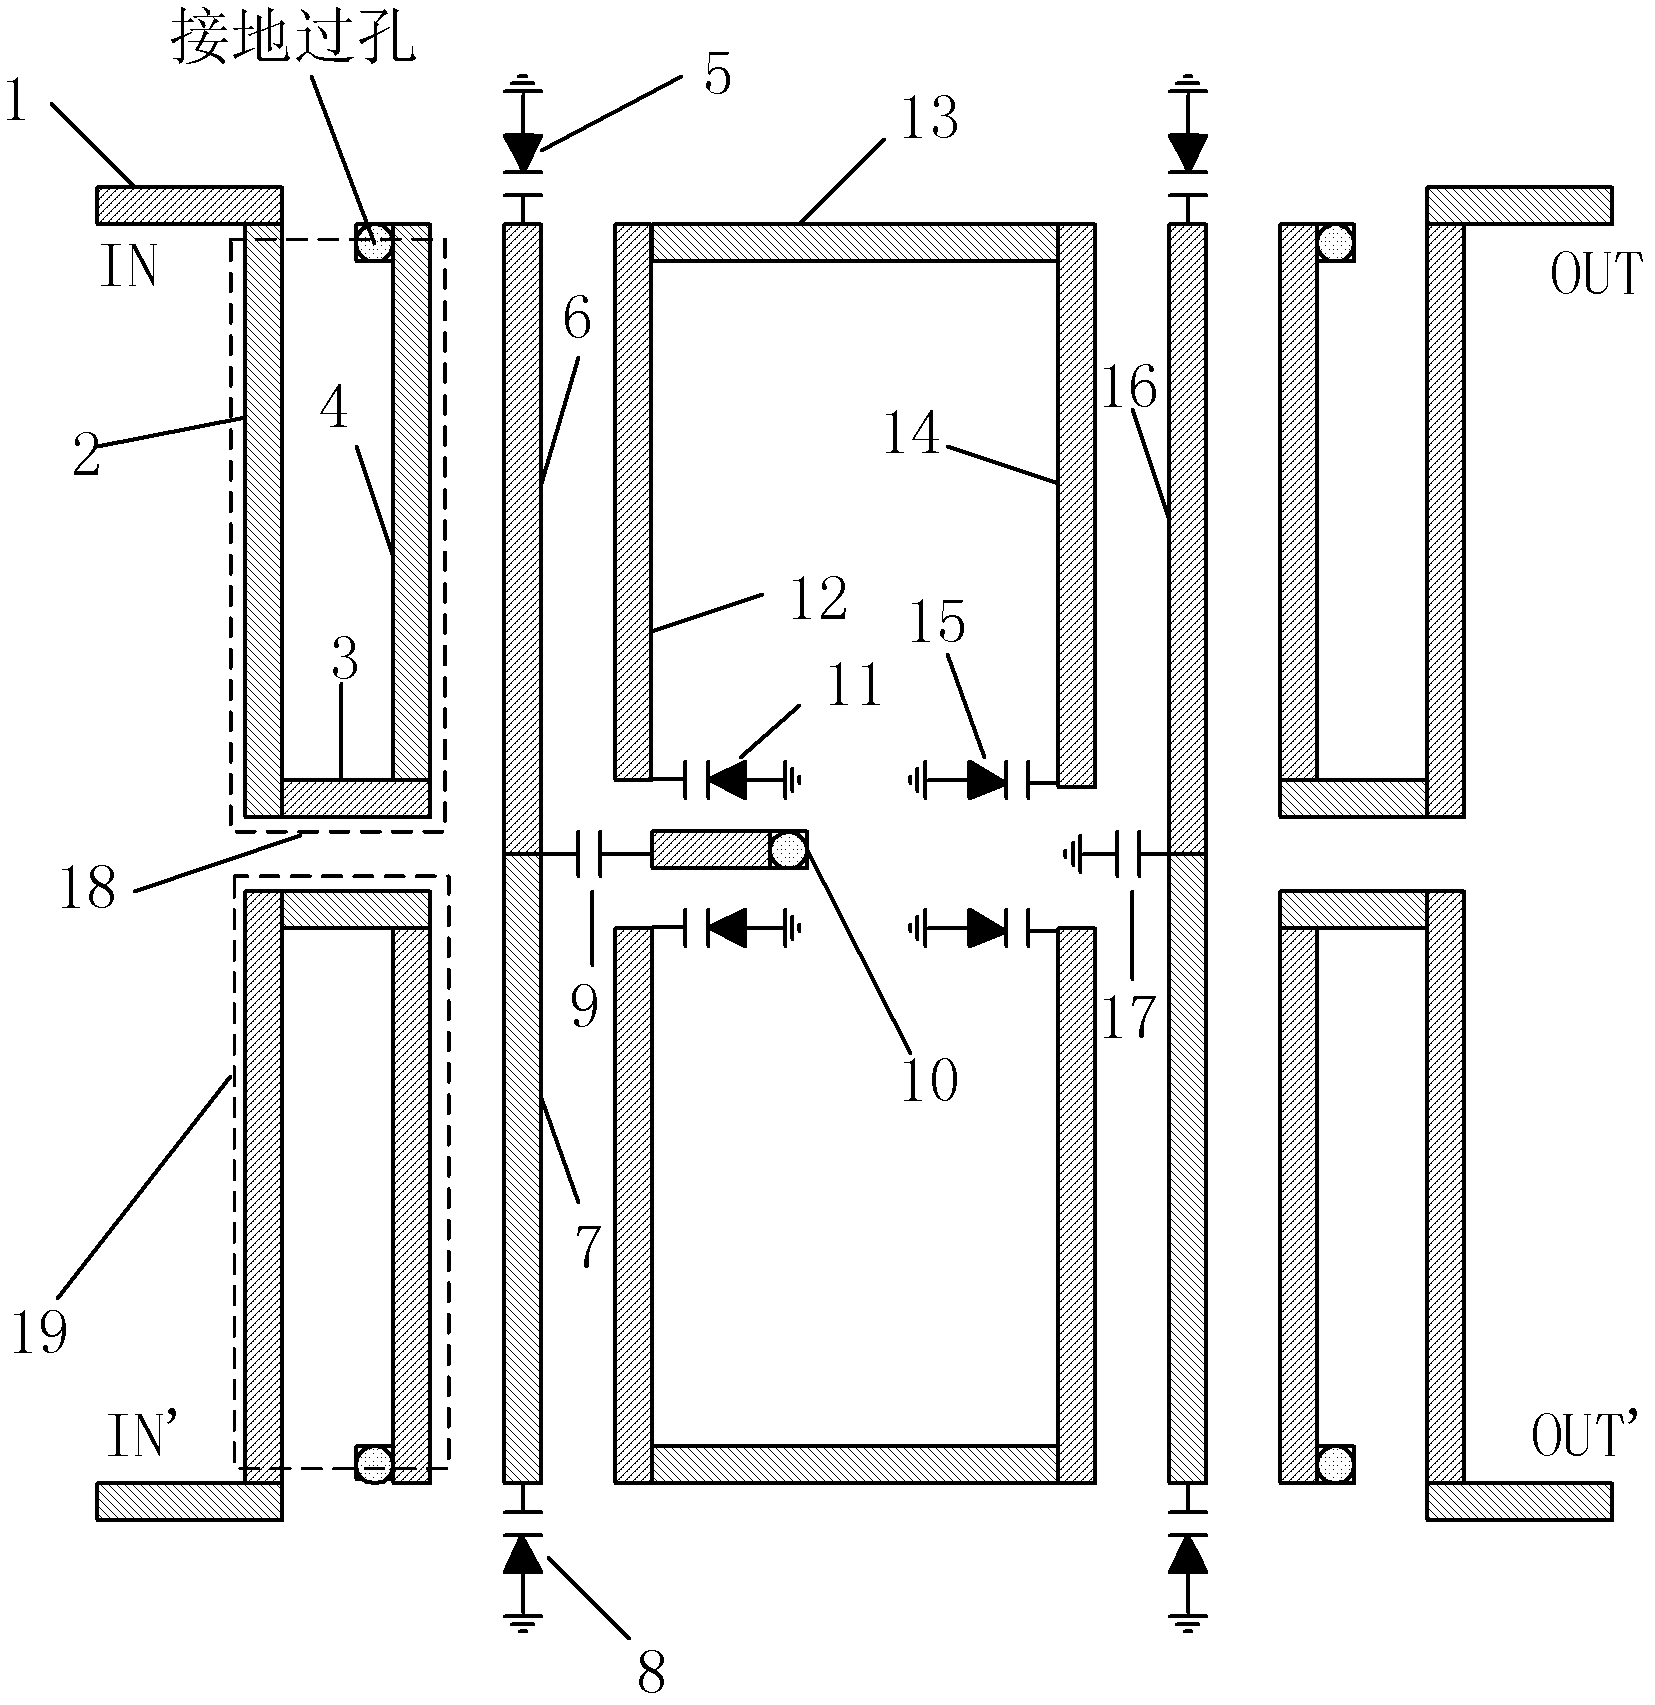 Balanced RF Electrically Tunable Bandpass Filter with Constant Relative Bandwidth